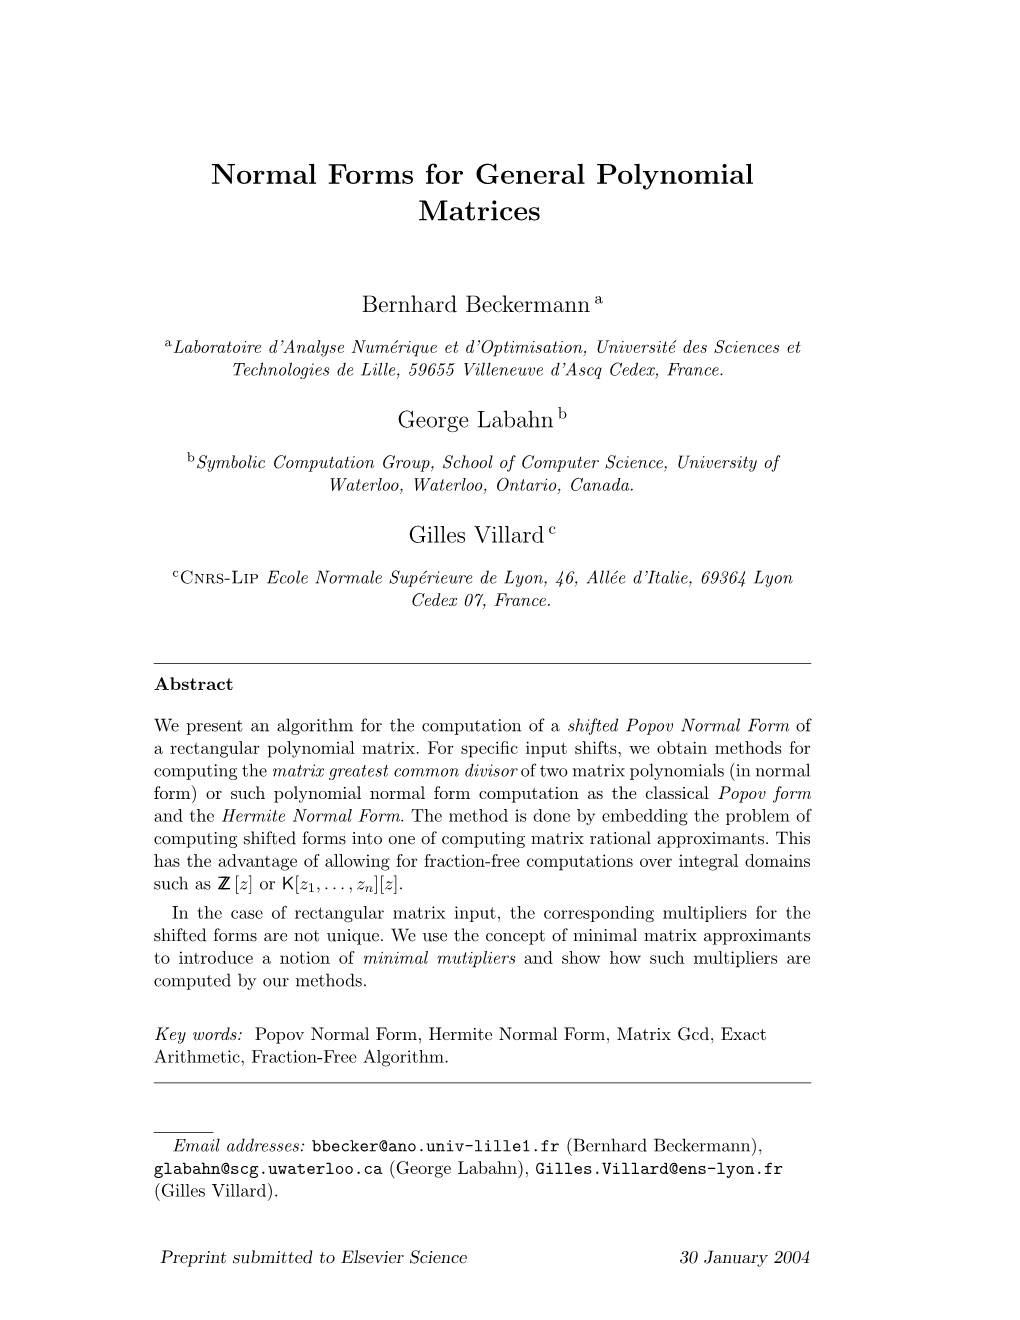 Normal Forms for General Polynomial Matrices